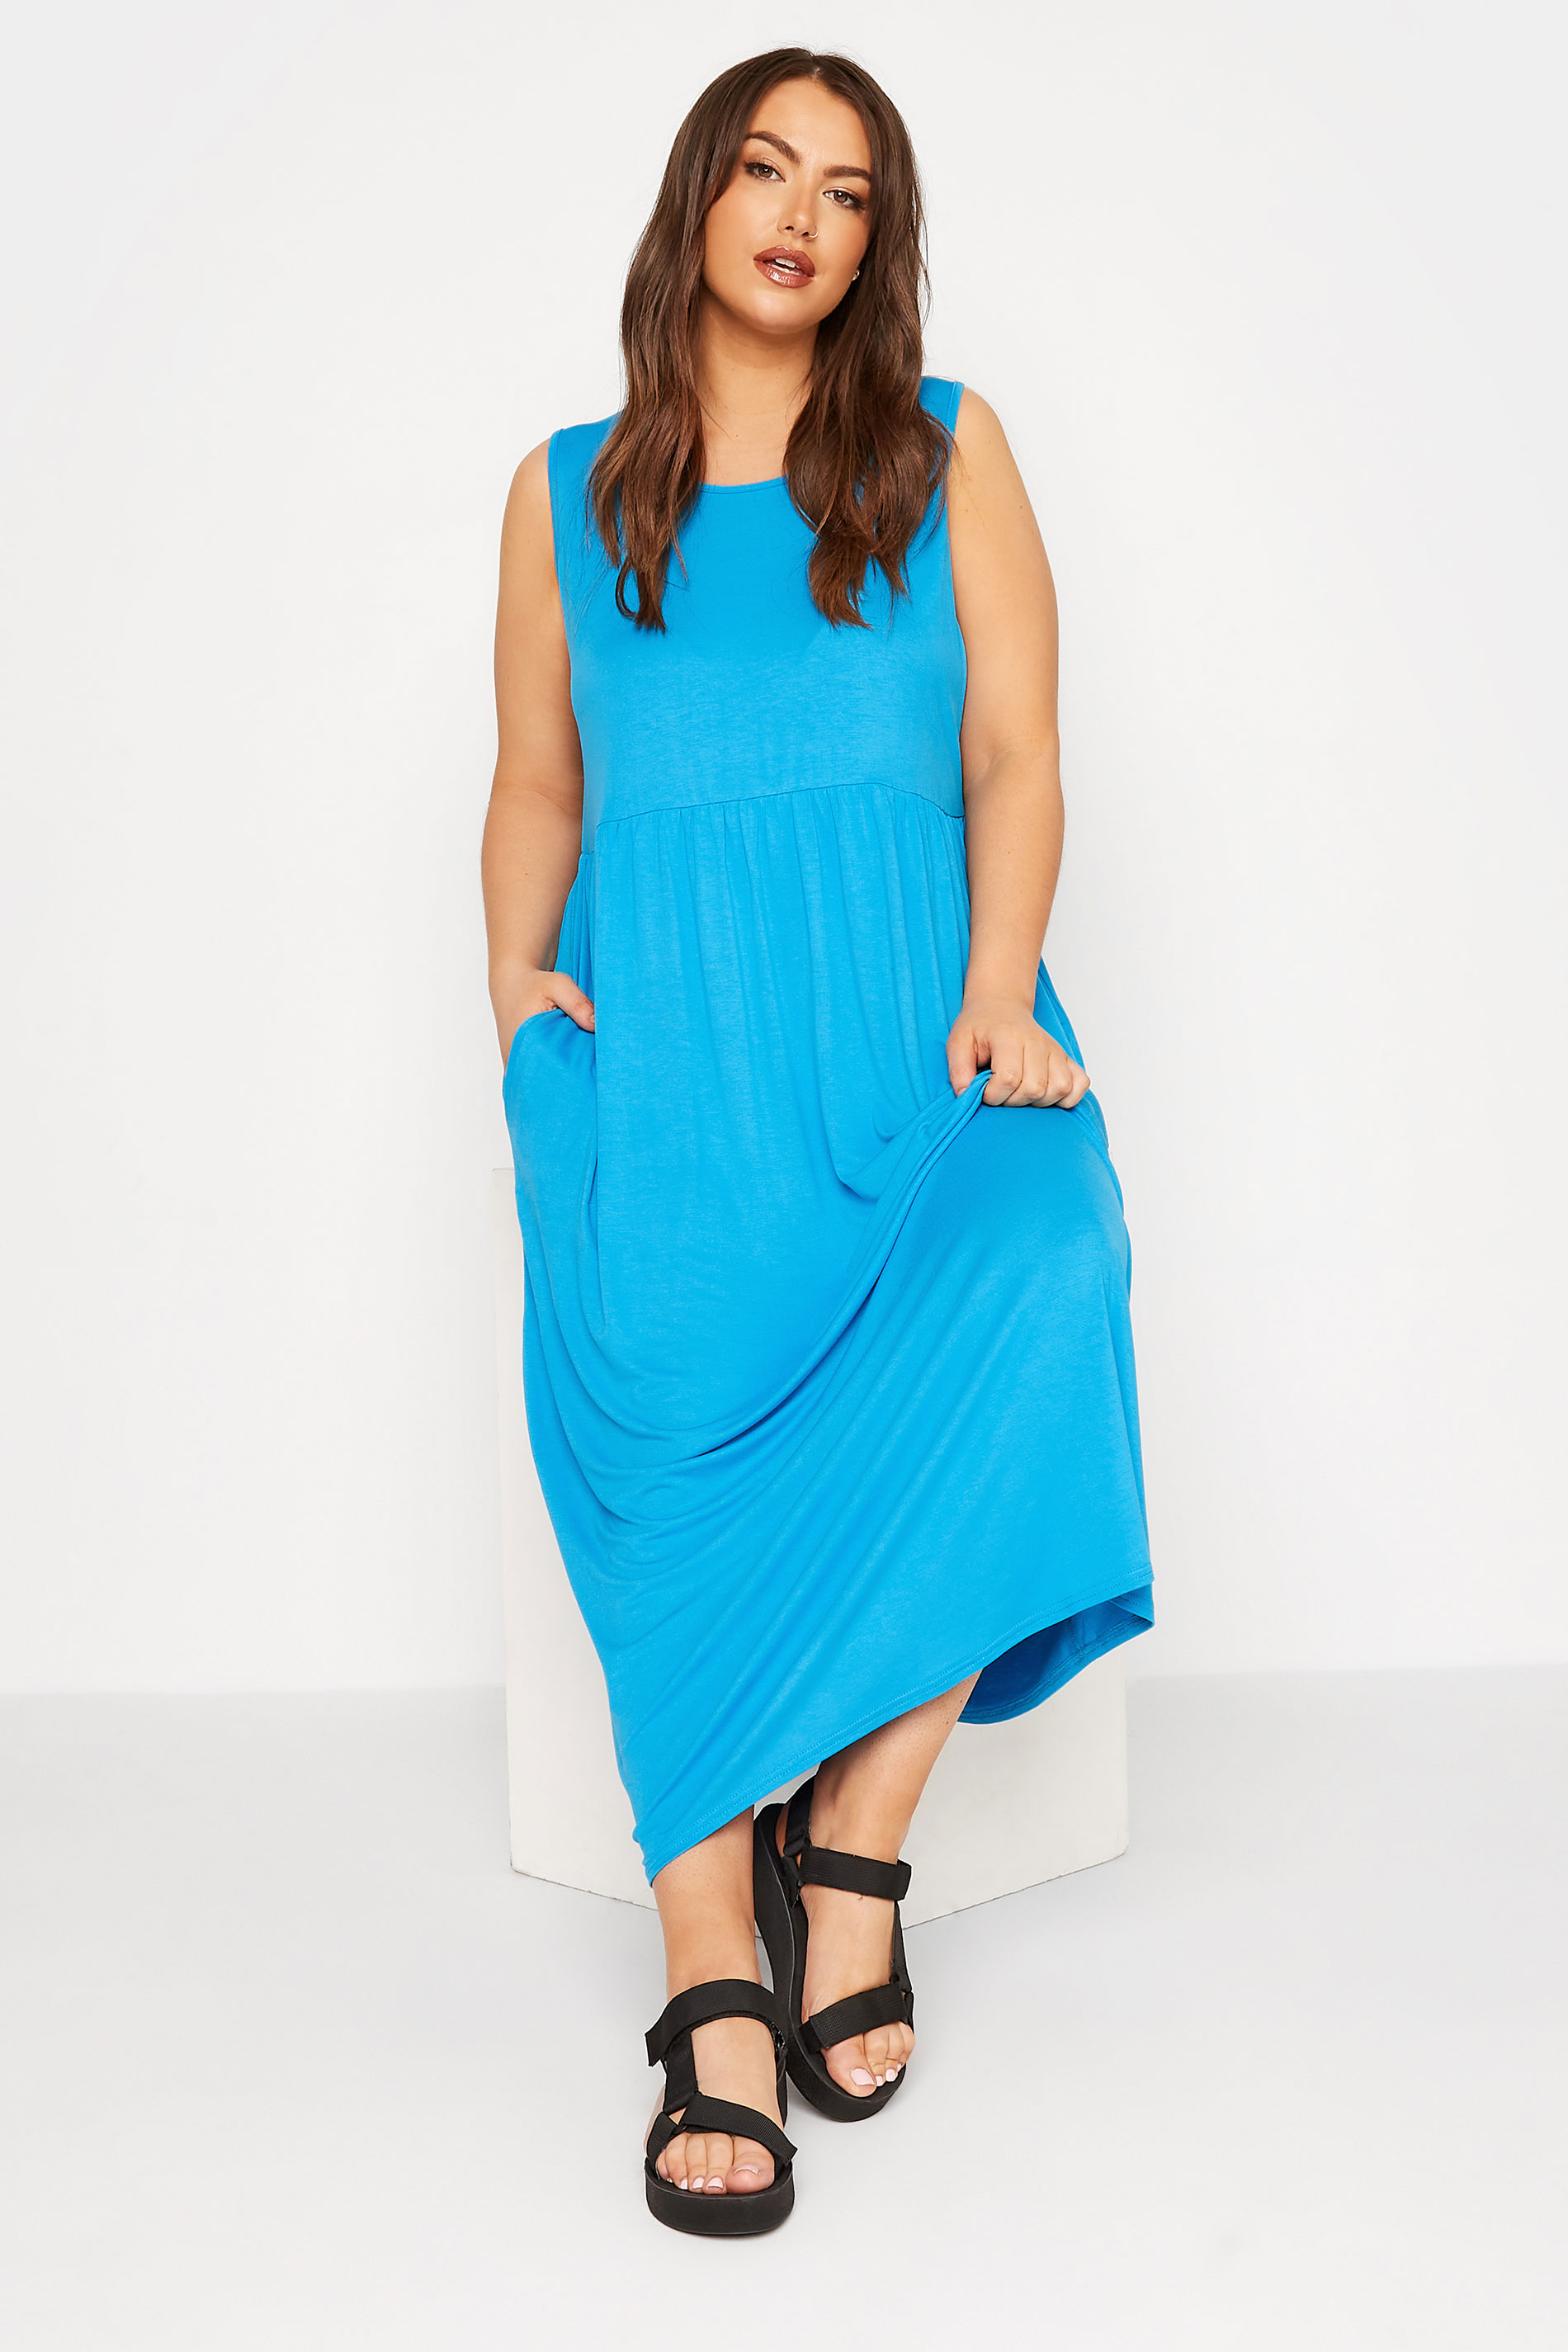 Robes Grande Taille Grande taille  Robes Longues | LIMITED COLLECTION - Robe Bleue Turquoise Maxi à Poches - ON07565